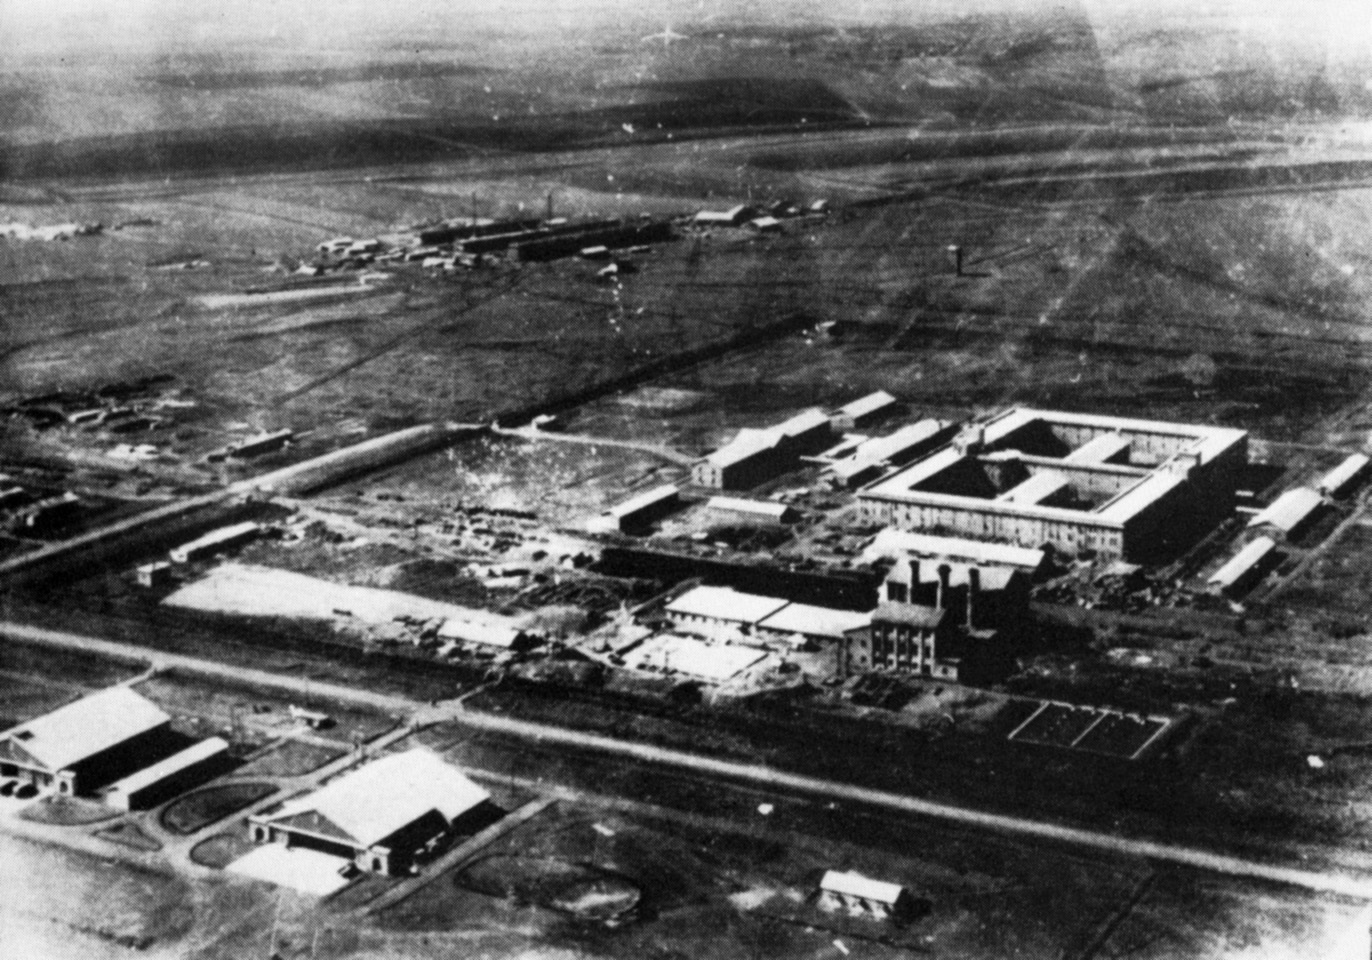 Japanese Unit 731 was charged with operating a biological-warfare facility Manchurian district of Pingfang. 